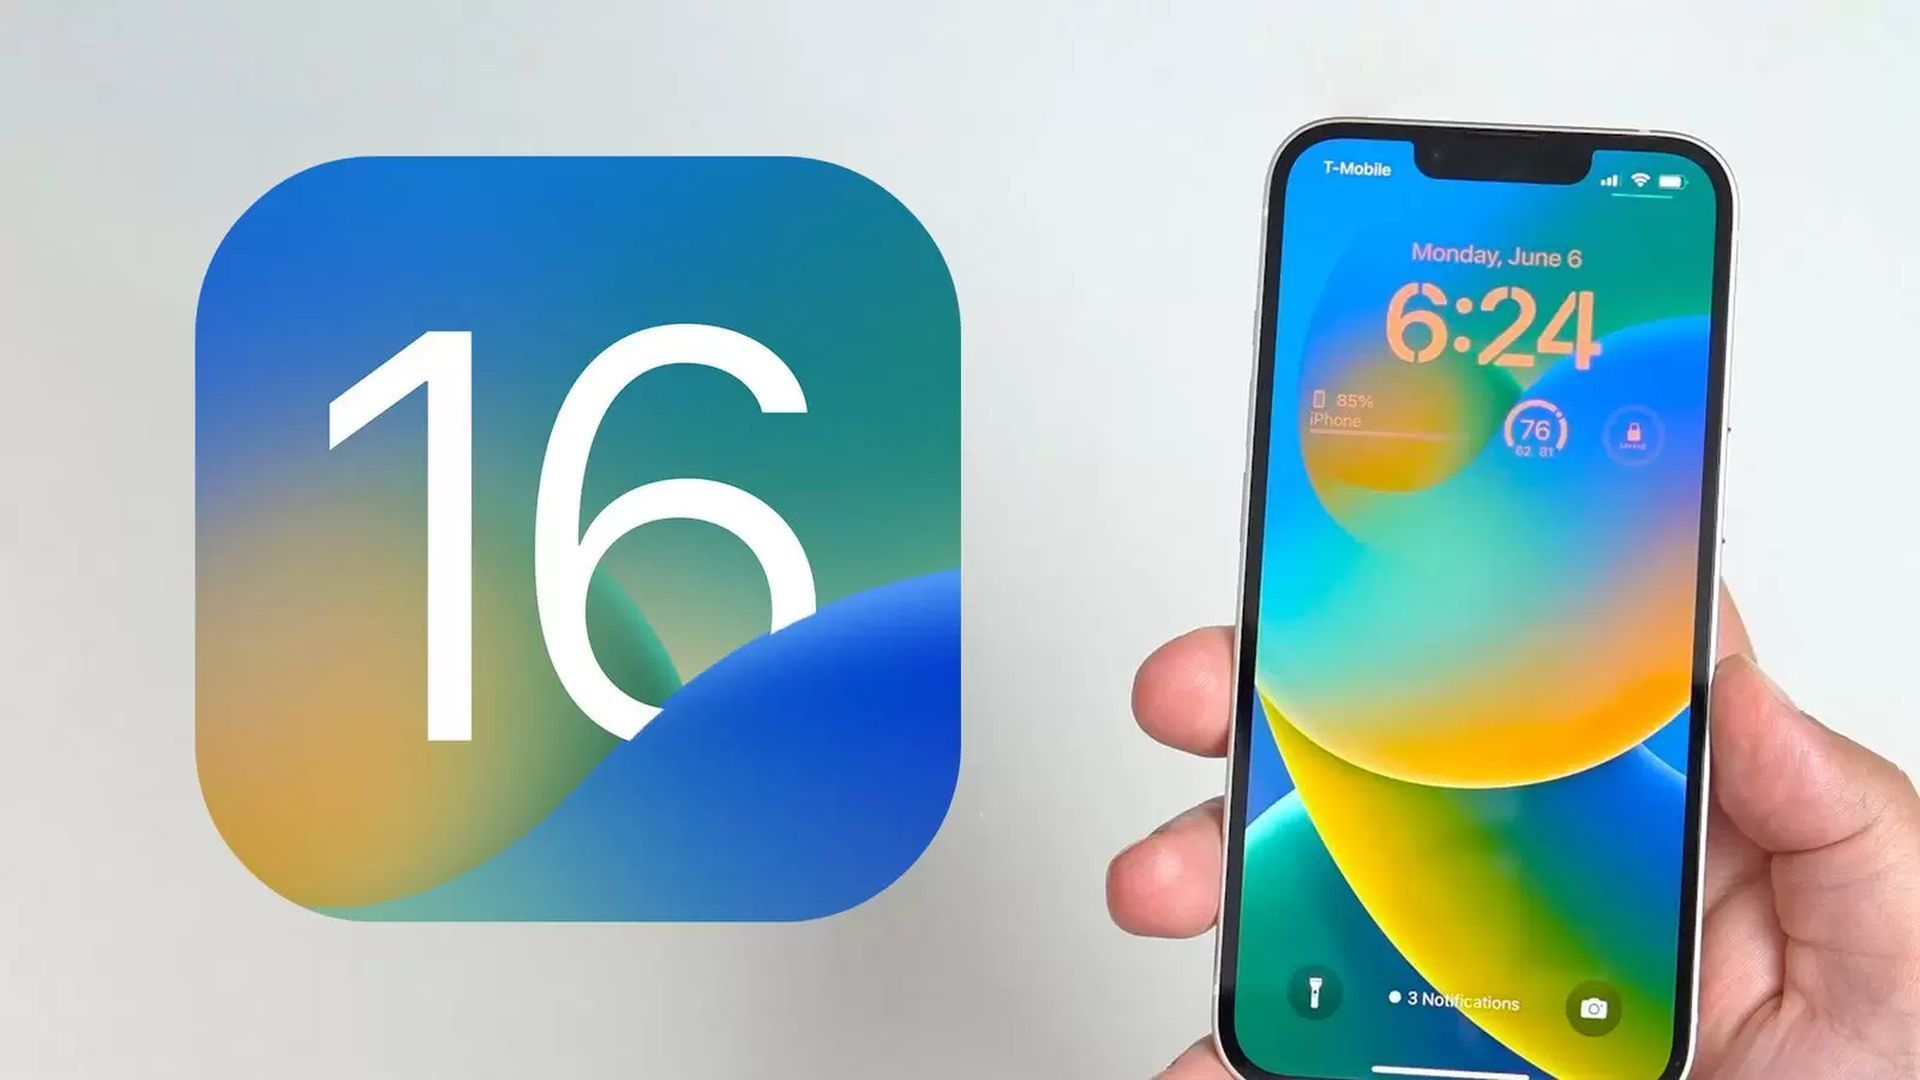 In this article, we are going to be covering how to add Distance Widget in iOS 16 Lock Screen, so you can enjoy the new widget feature.